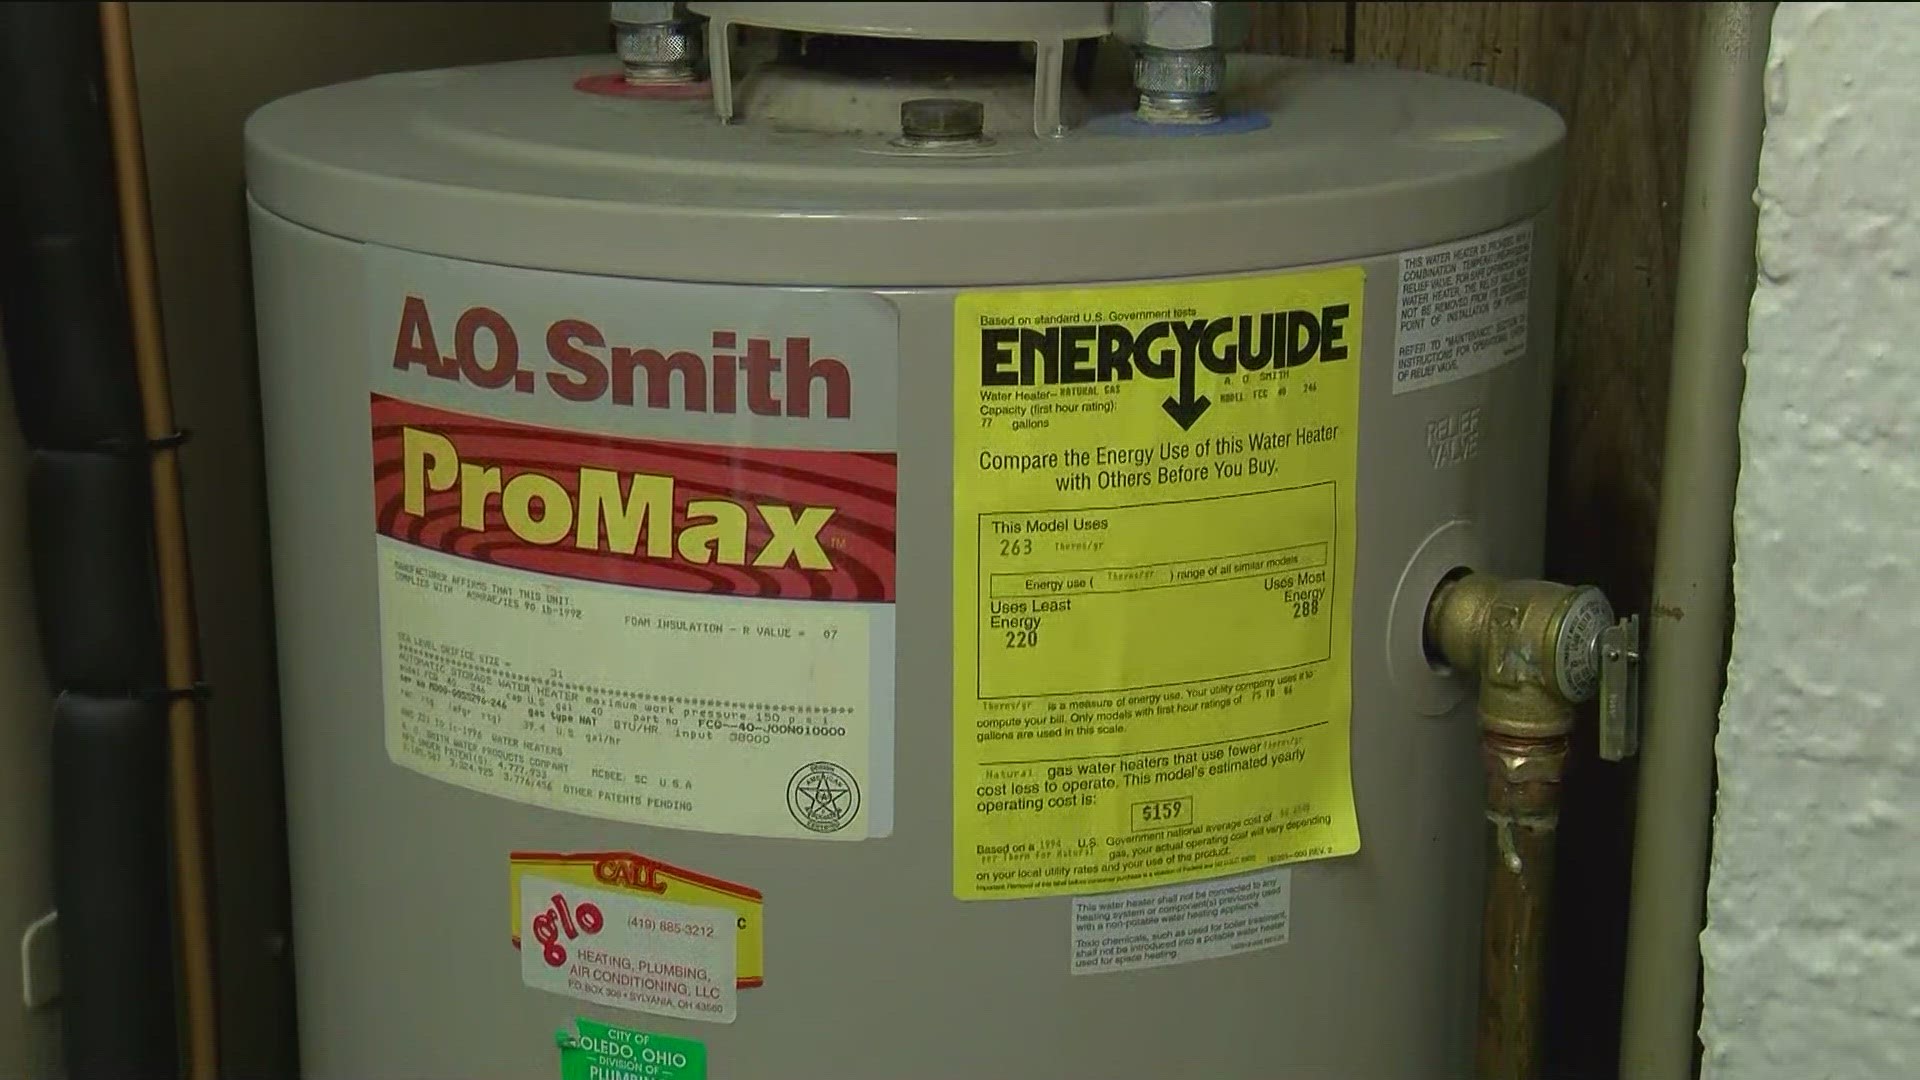 While this could help us save on utility bills, could it be more costly to replace these household items?